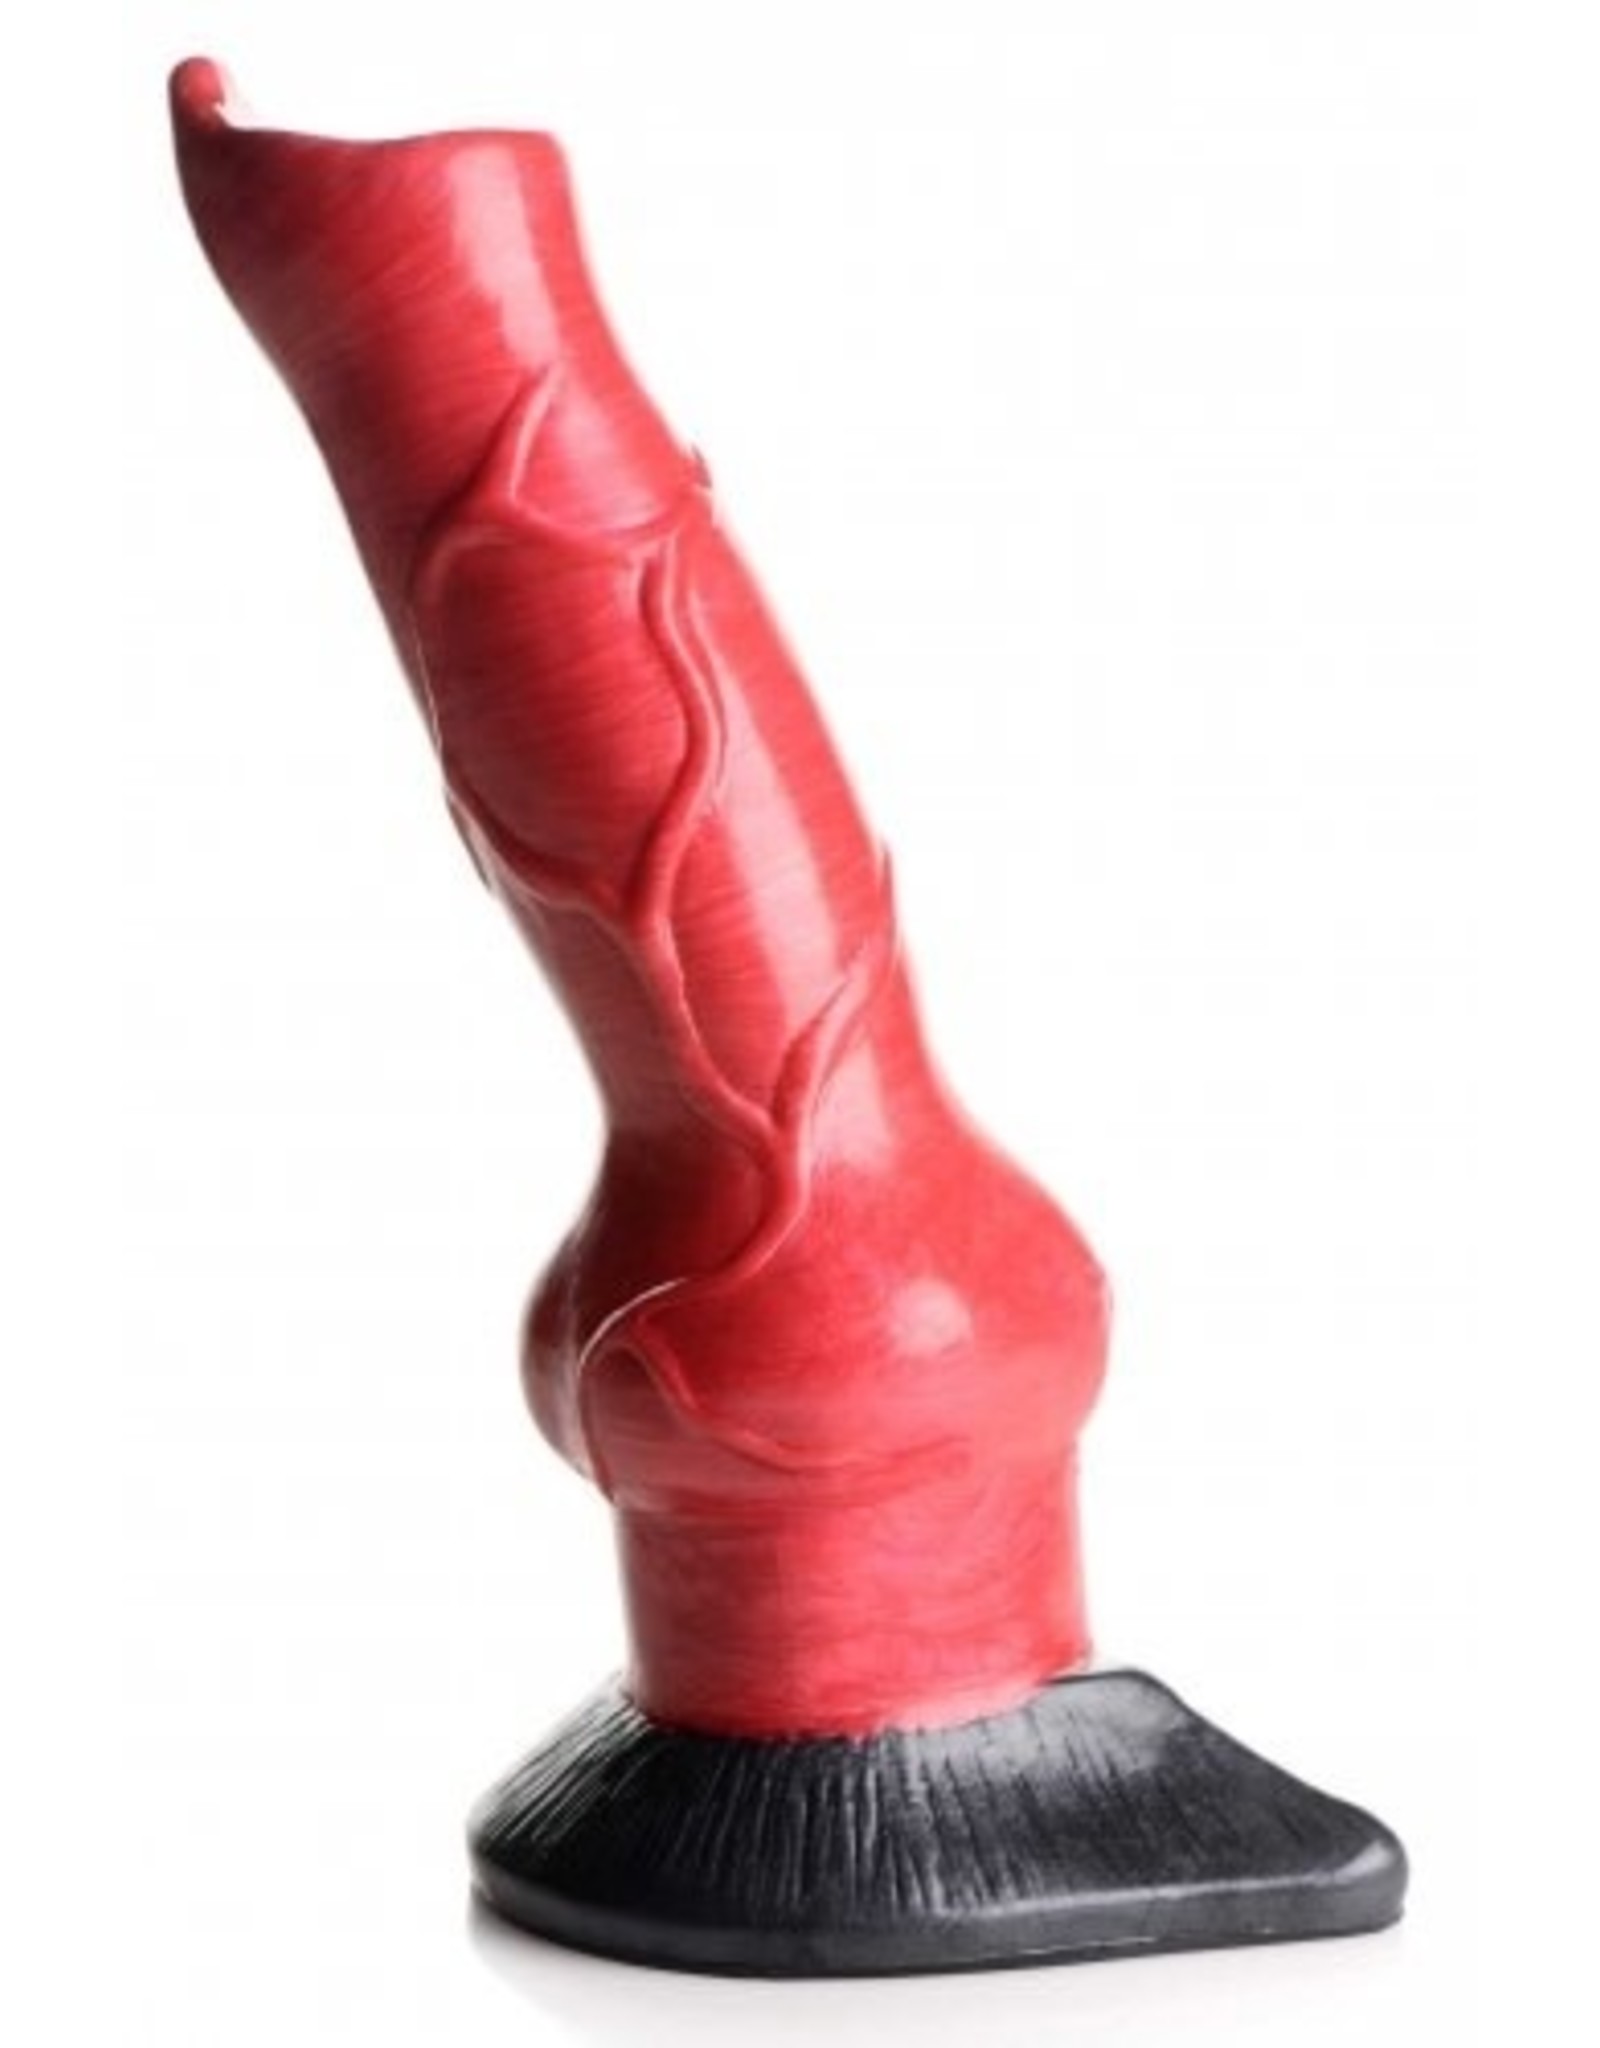 XR Brands Creature Cocks - Hell-Hound Silicone Dildo